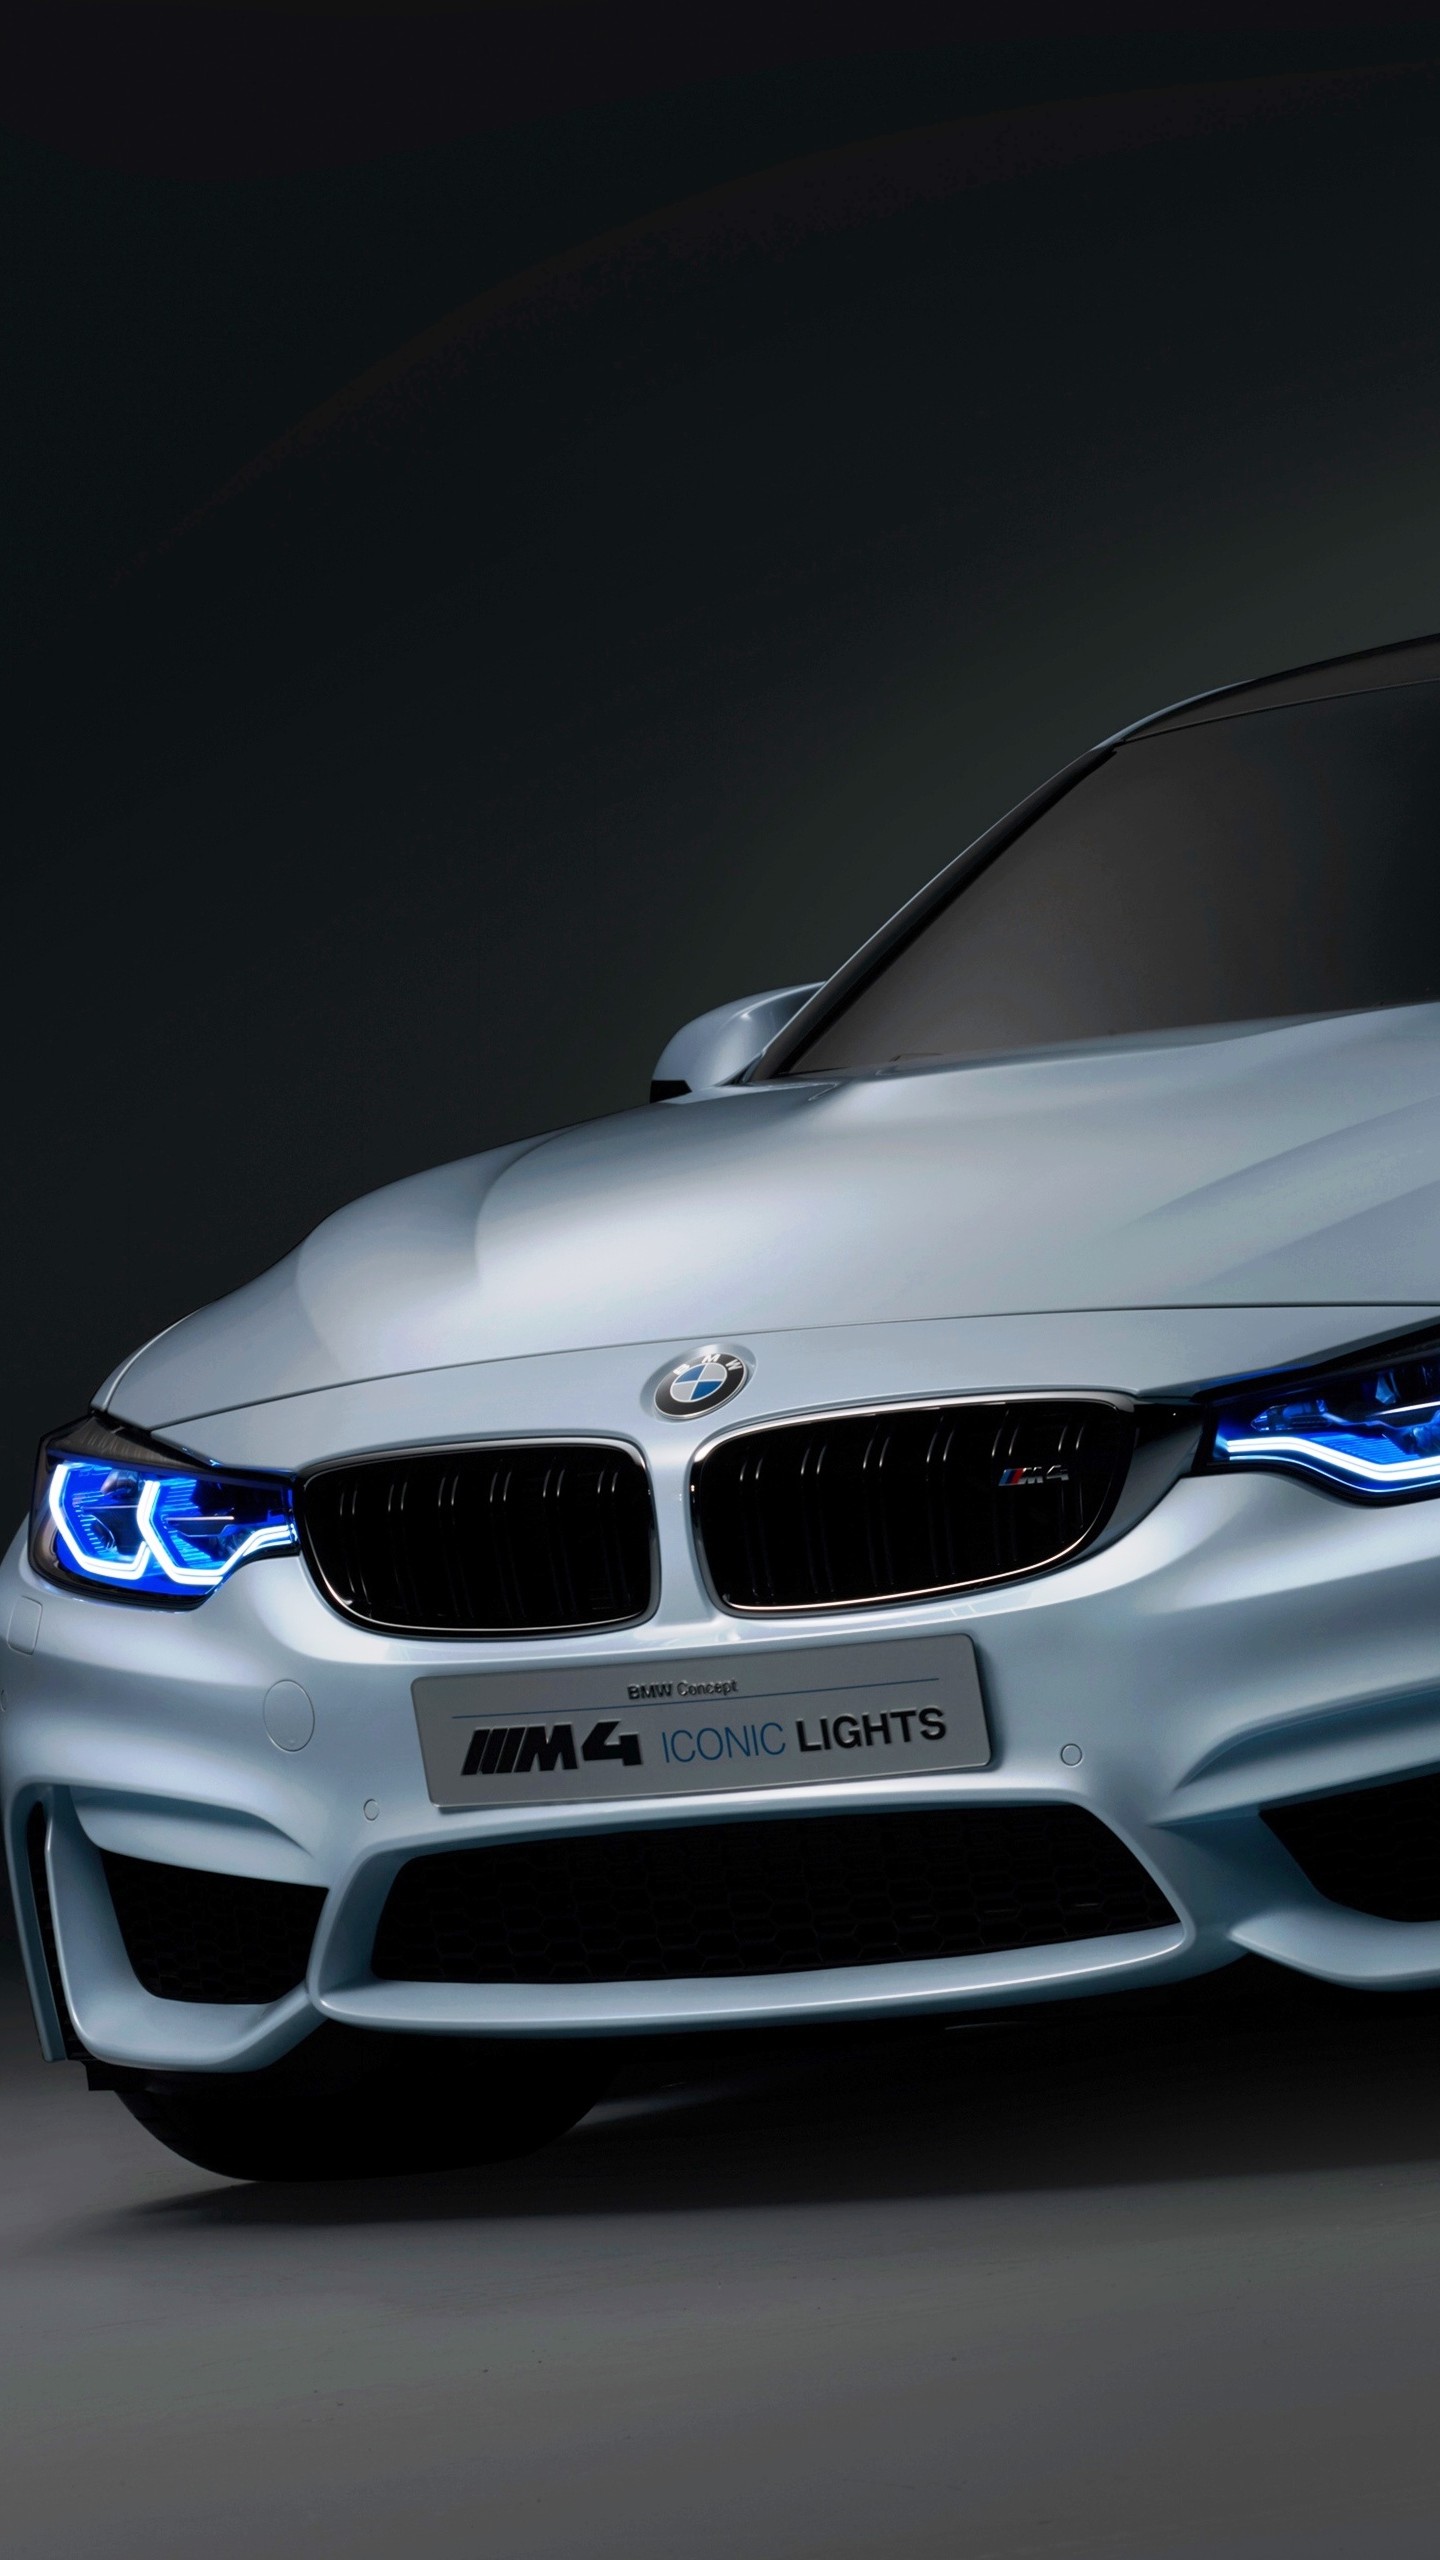 1440x2560 Preview wallpaper bmw, iconic lights, f82, front view 